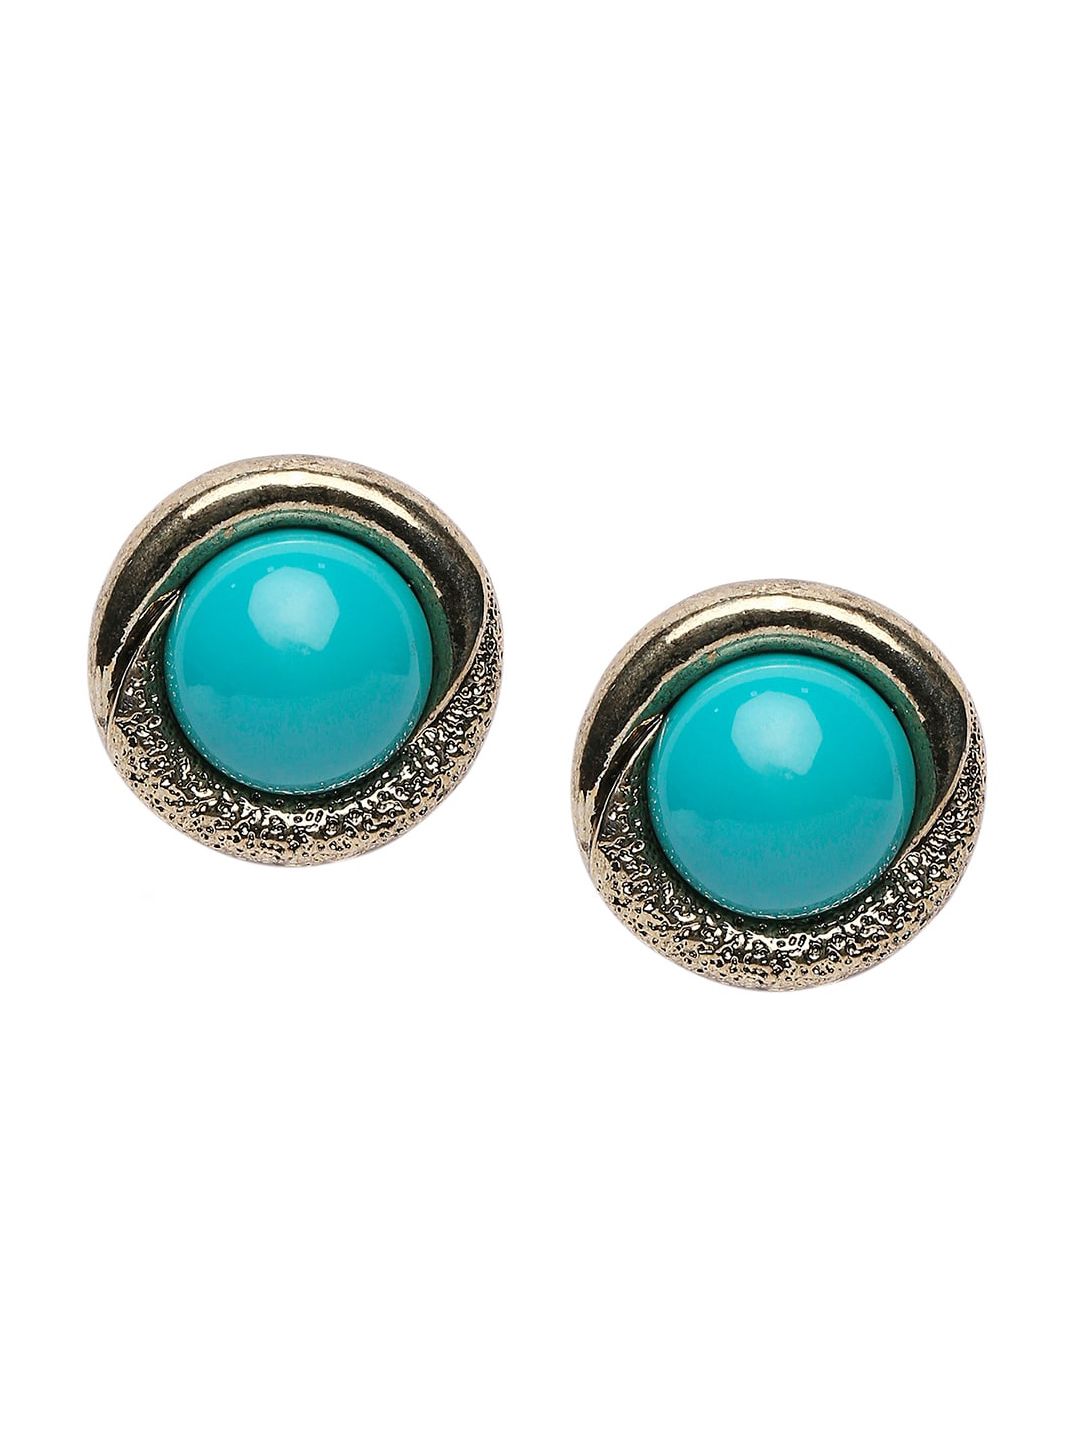 SATCHEL Turquoise Blue Contemporary Studs Earrings Price in India